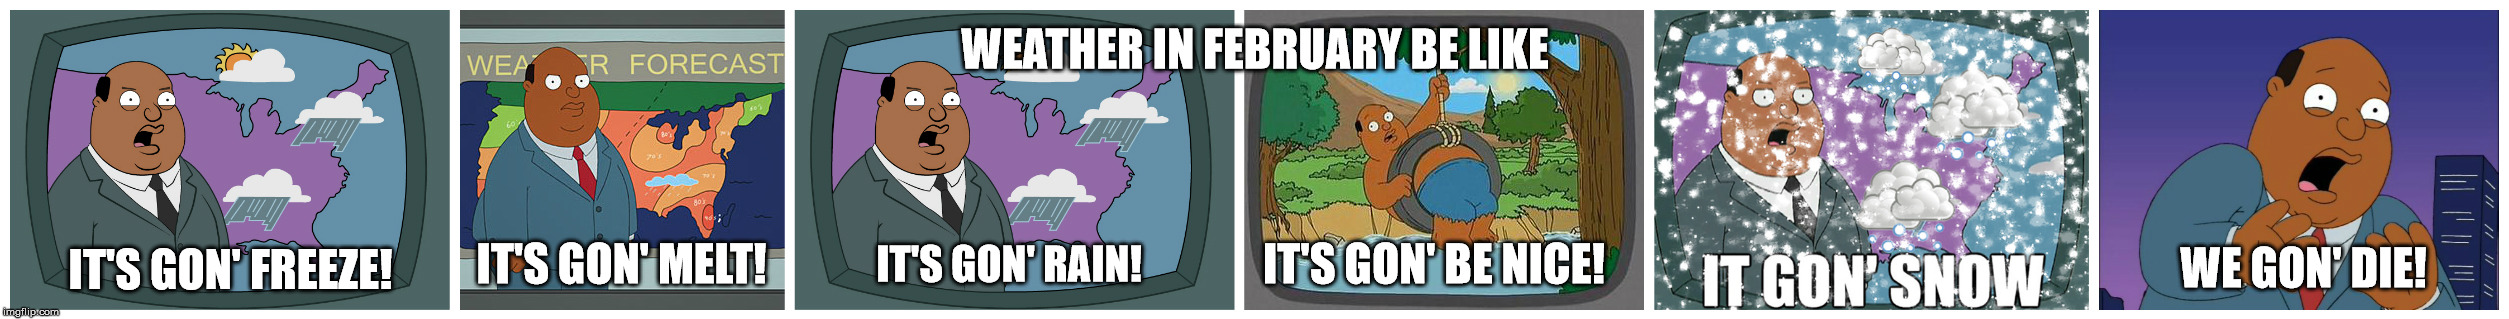 And That's Just The First Few Hours | WEATHER IN FEBRUARY BE LIKE; IT'S GON' FREEZE! IT'S GON' MELT! IT'S GON' RAIN! IT'S GON' BE NICE! WE GON' DIE! | image tagged in weather in pa in february,ollie williams | made w/ Imgflip meme maker